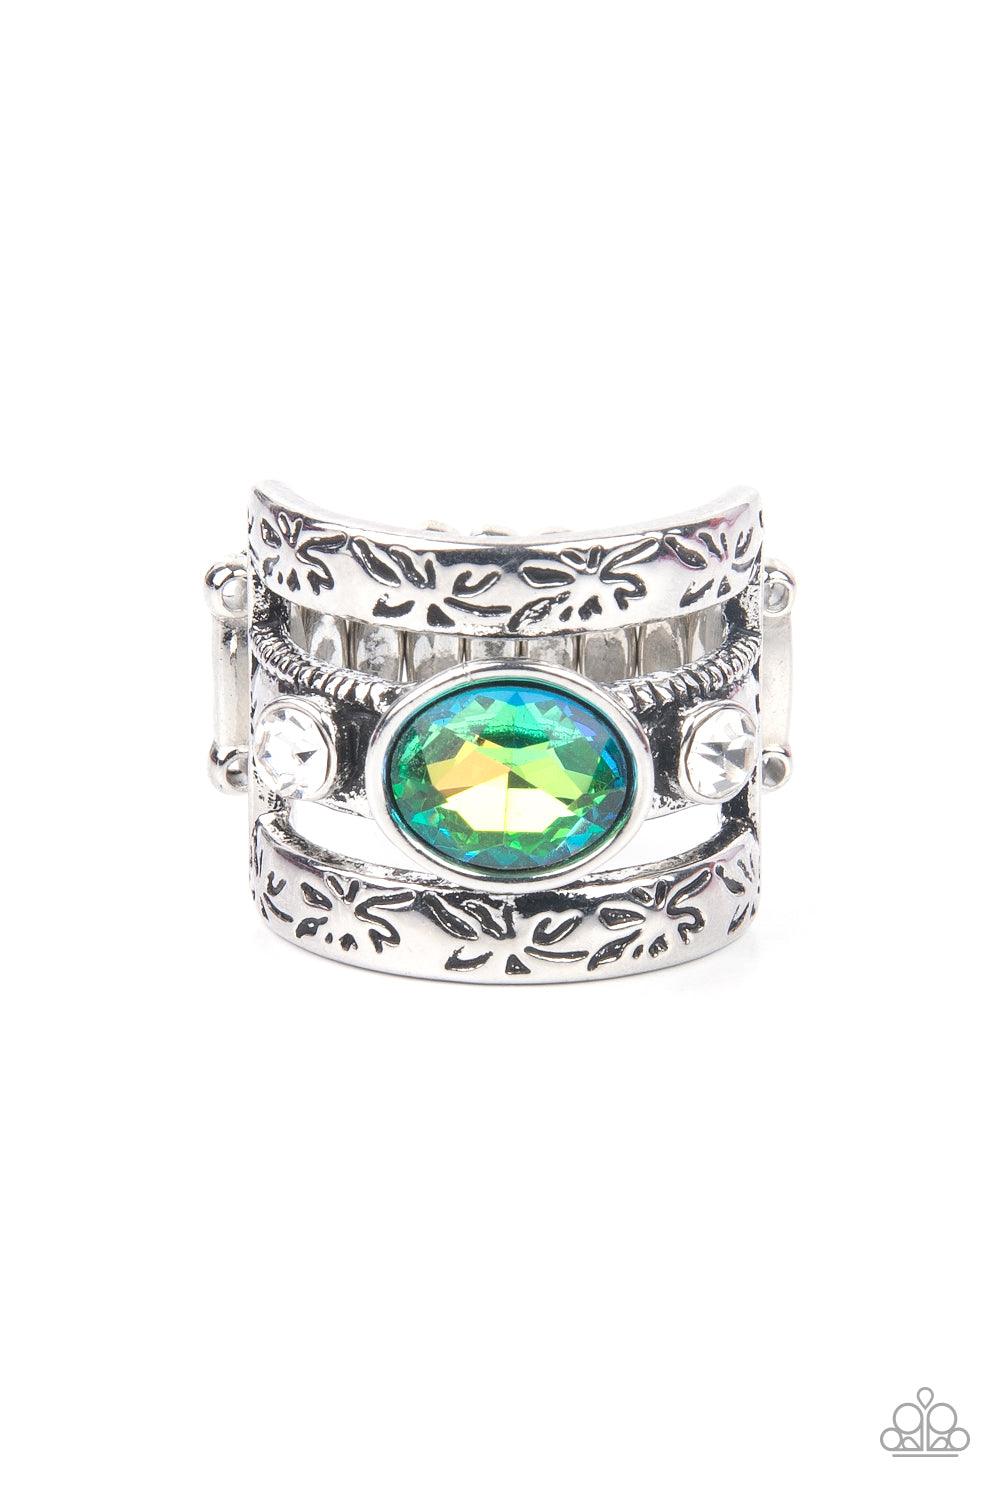 Paparazzi Accessories The GLEAMING Tower - Green A gleaming iridescent green oval cut gem sits atop a silver metal bar with smaller white rhinestones resting on either side. Silver bars etched in floral detail on top and bottom create a towering effect ac